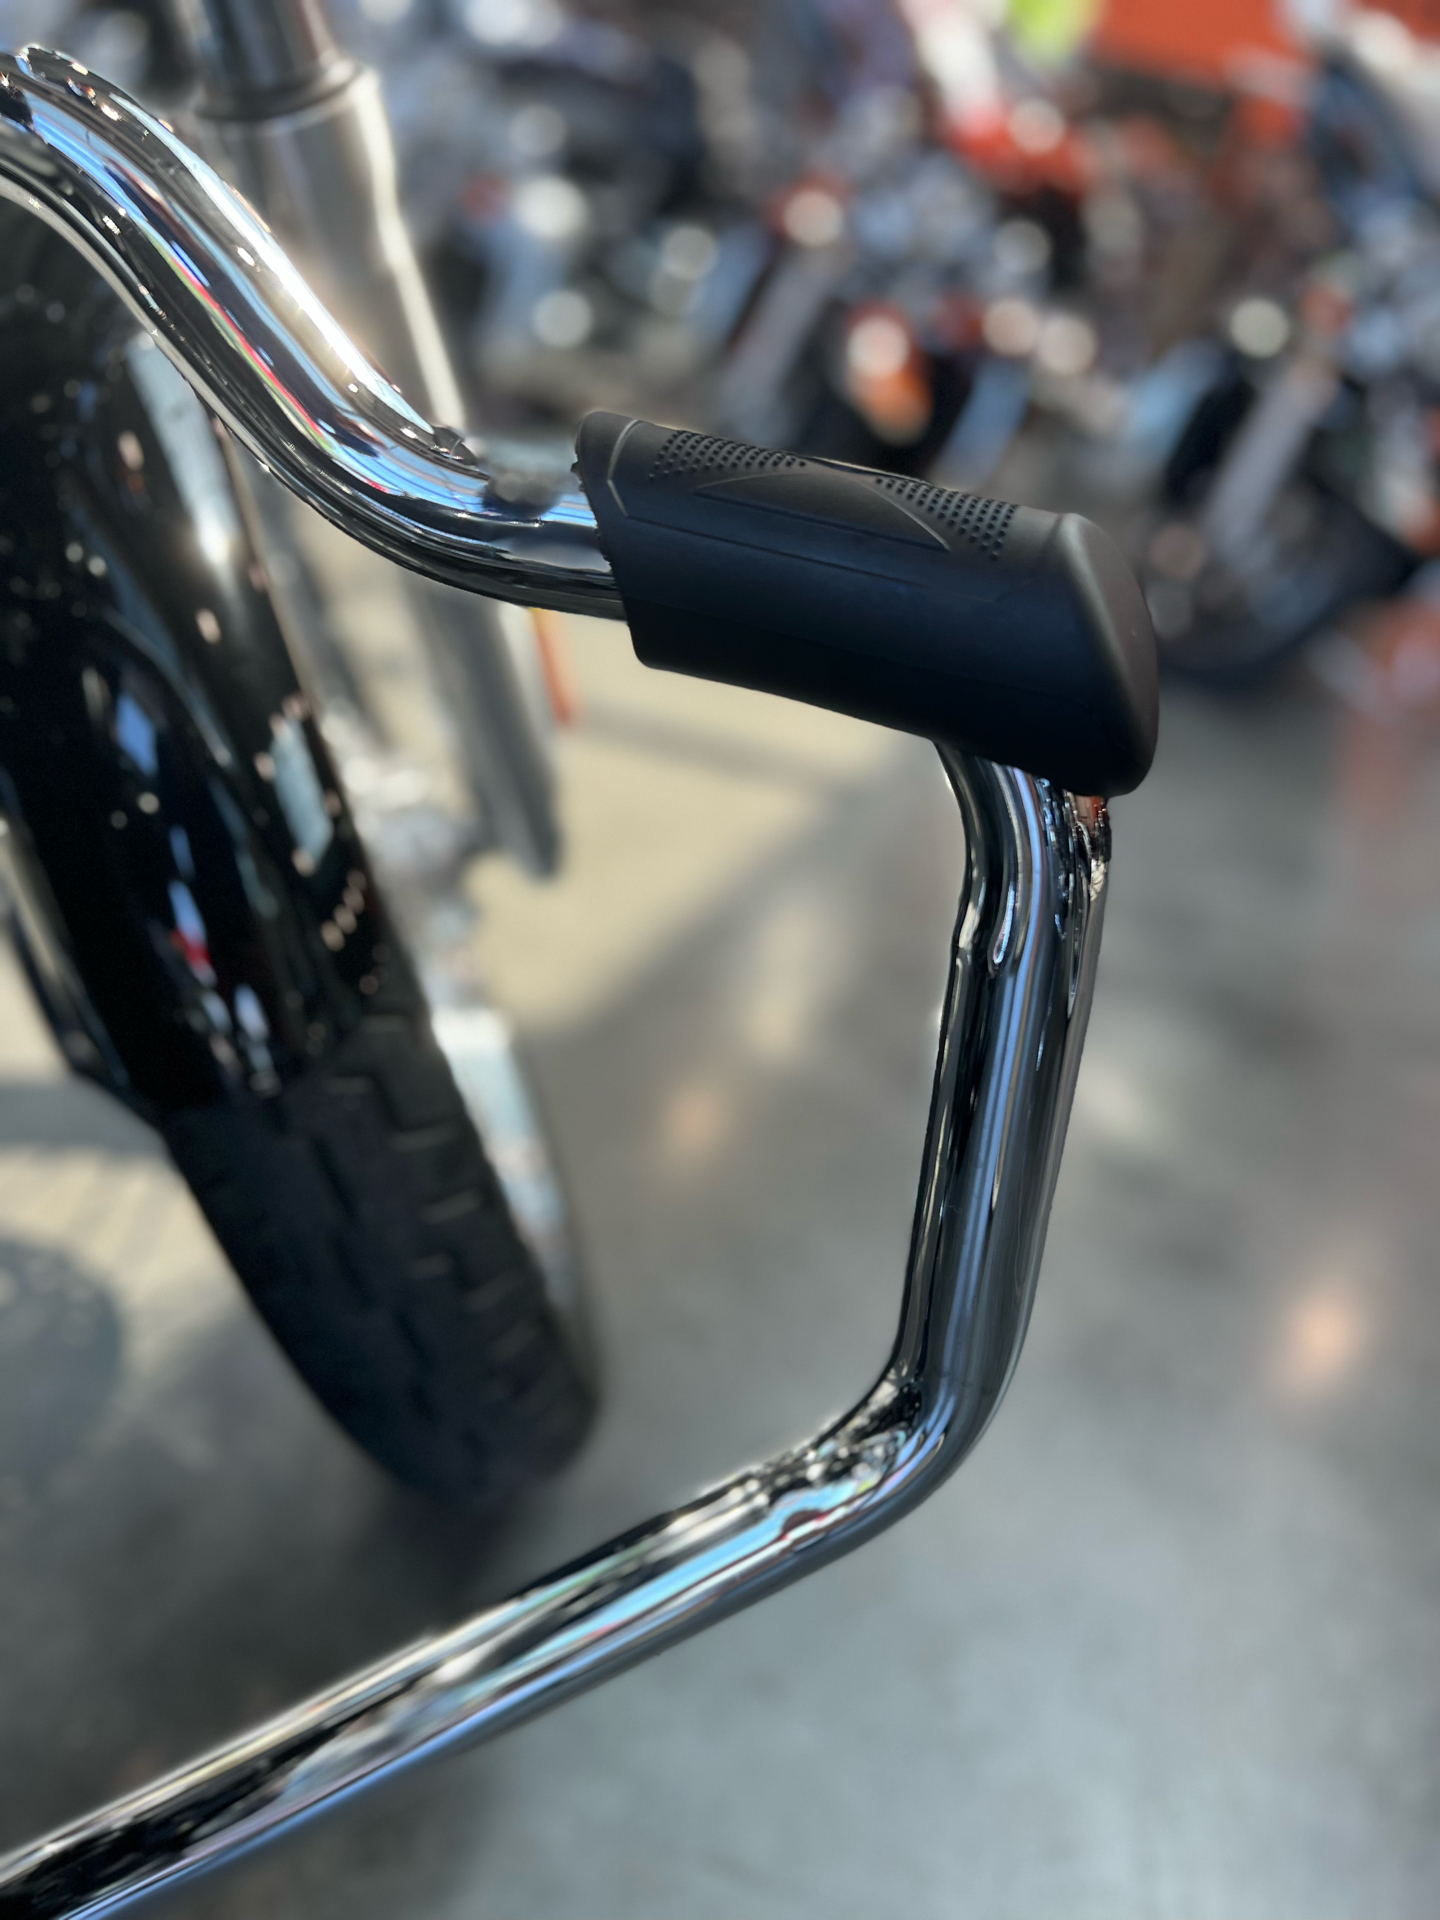 2021 Harley-Davidson FXST Softail Standard in Columbia, Tennessee - Photo 8